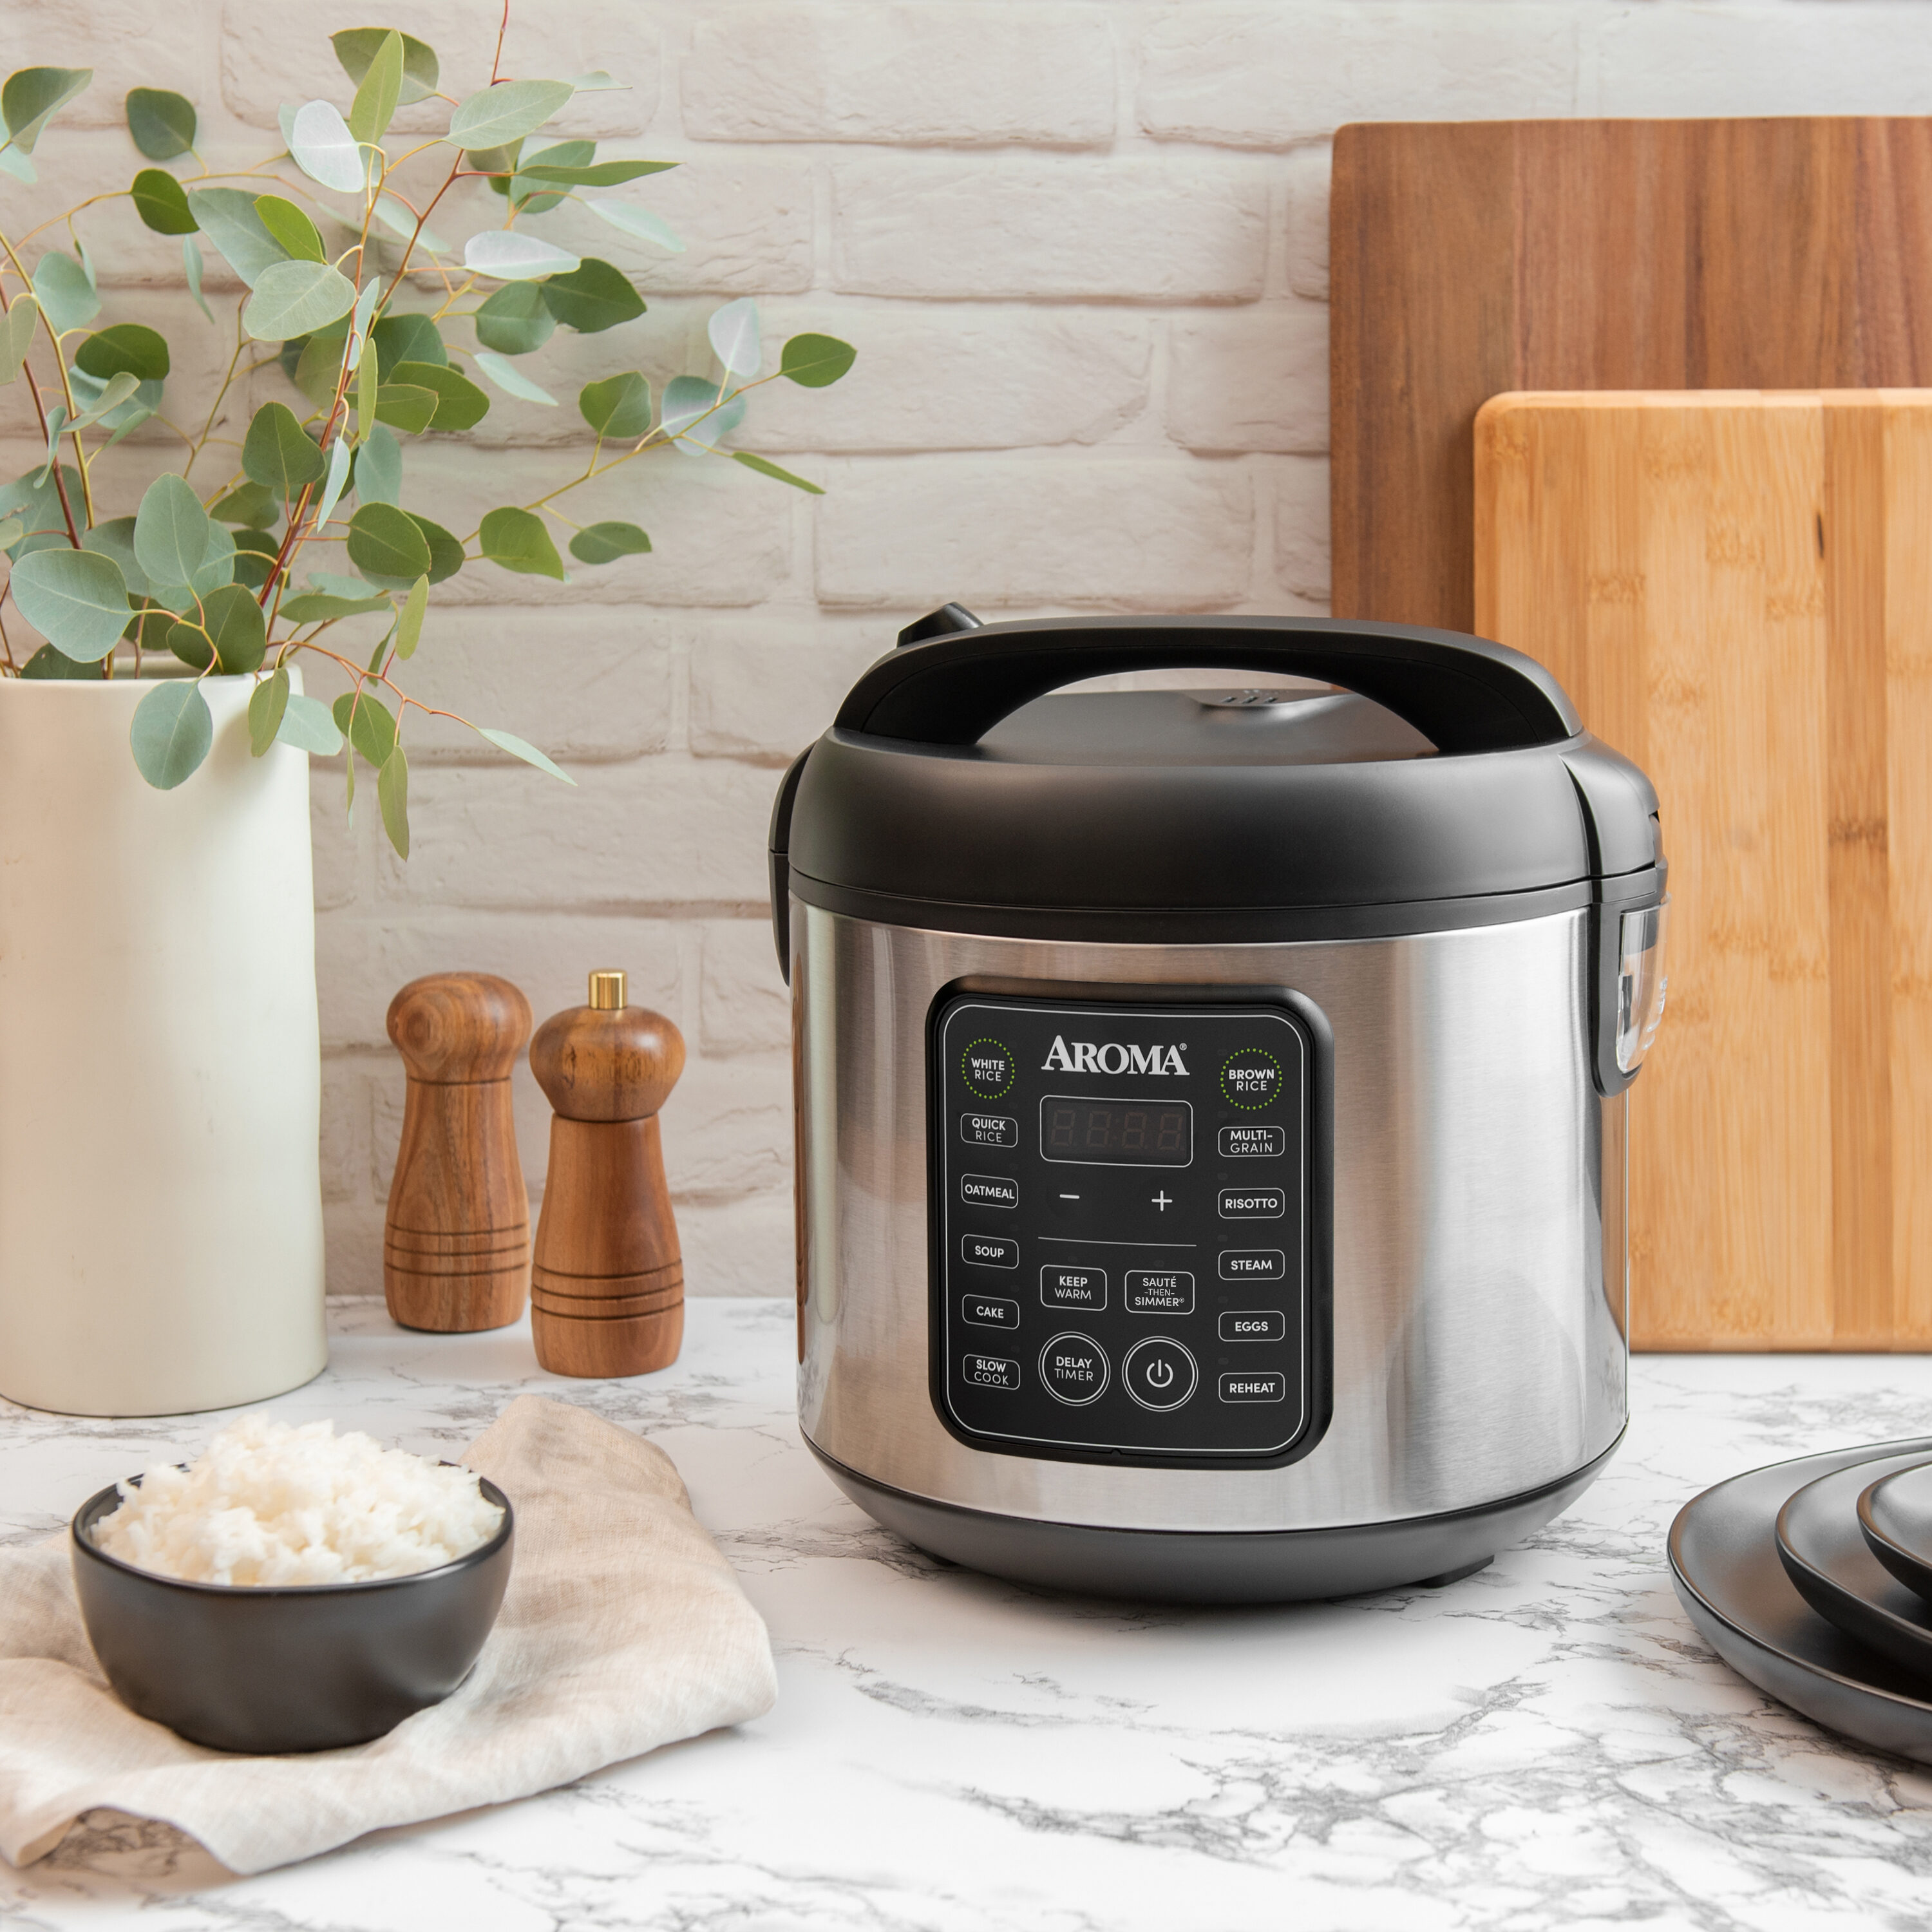 How To Use An Aroma Professional Rice Cooker